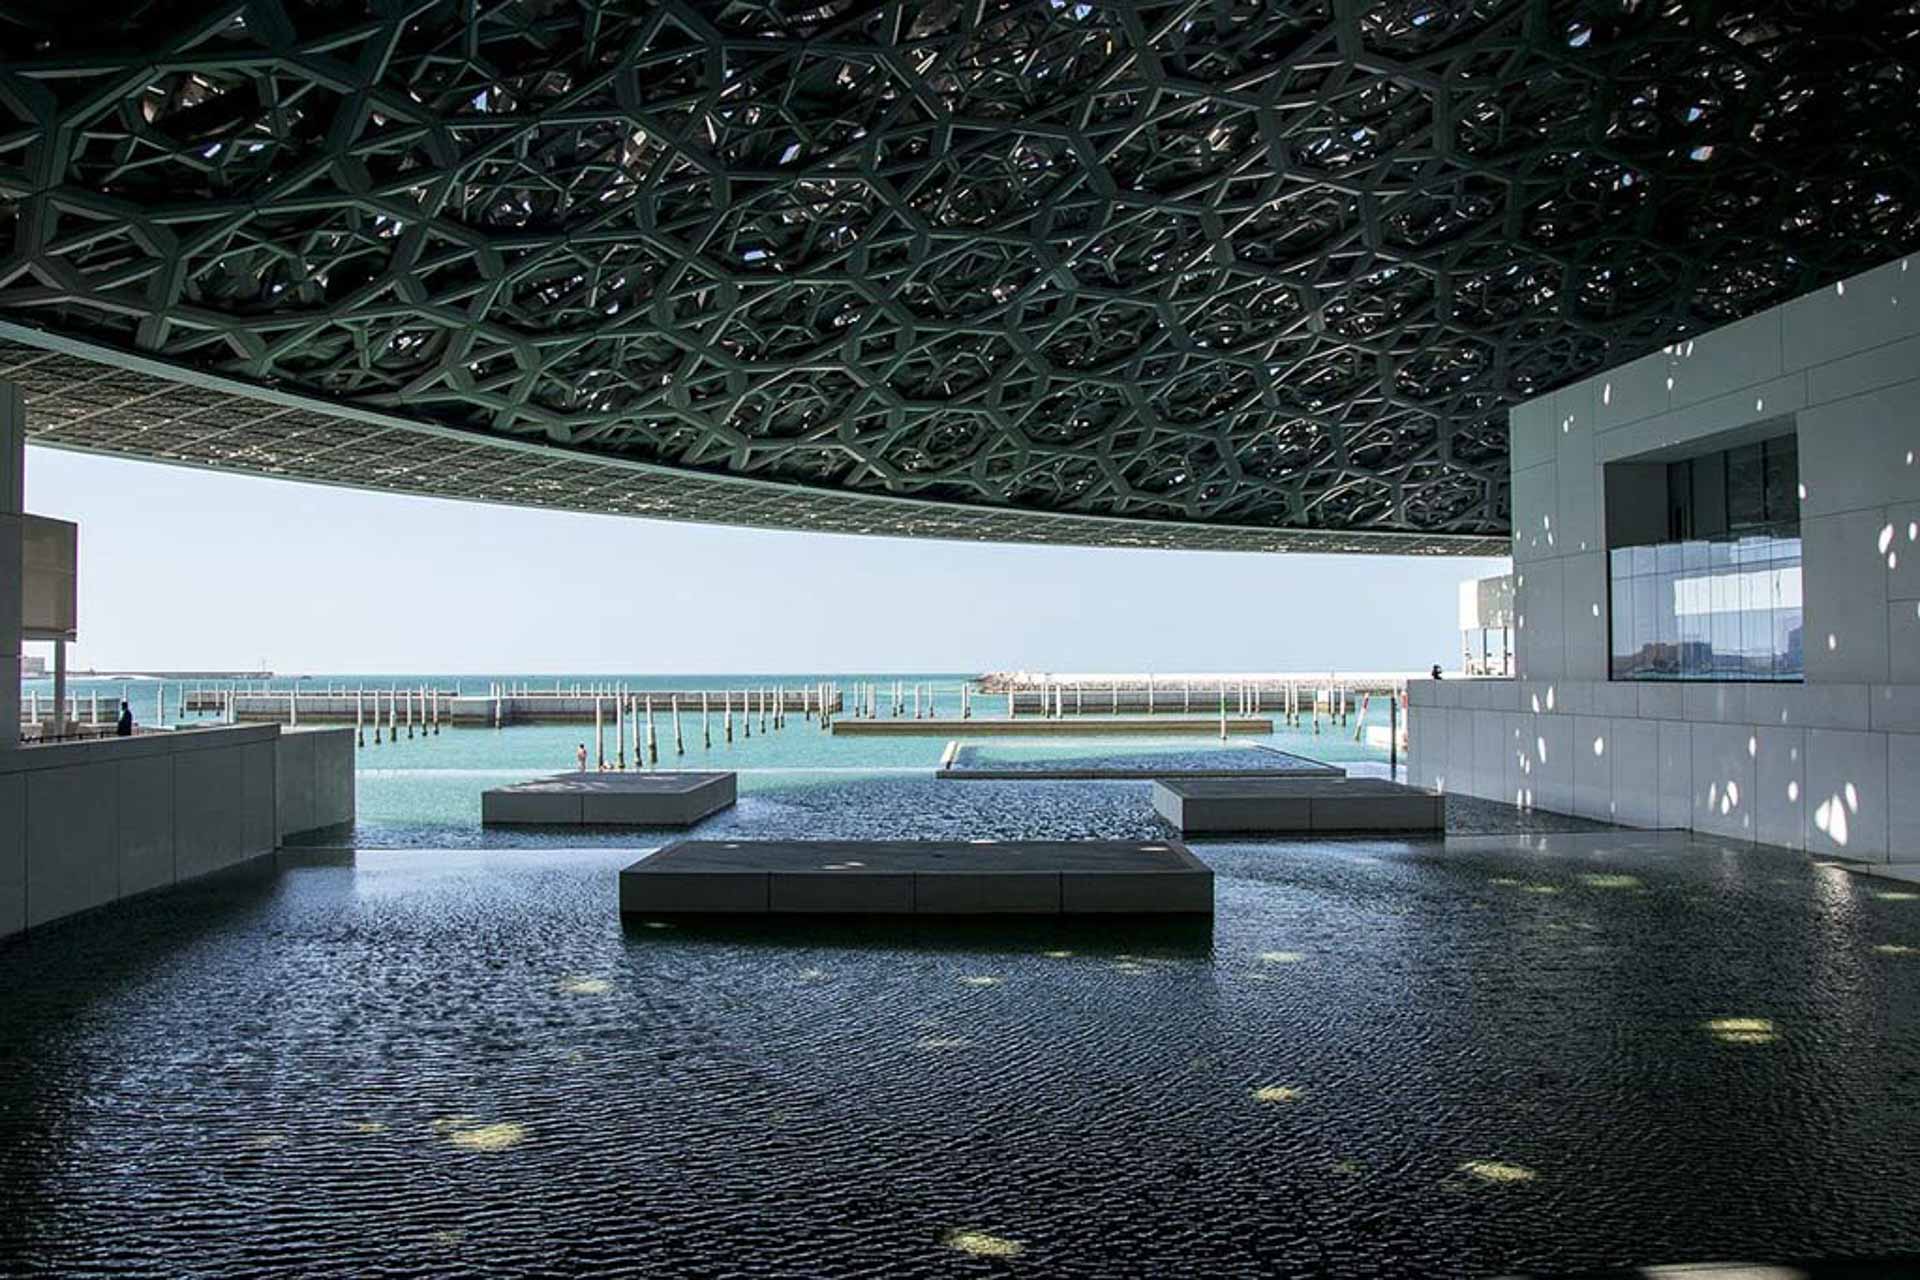 View inside the Louvre Museum of Abu Dhabi